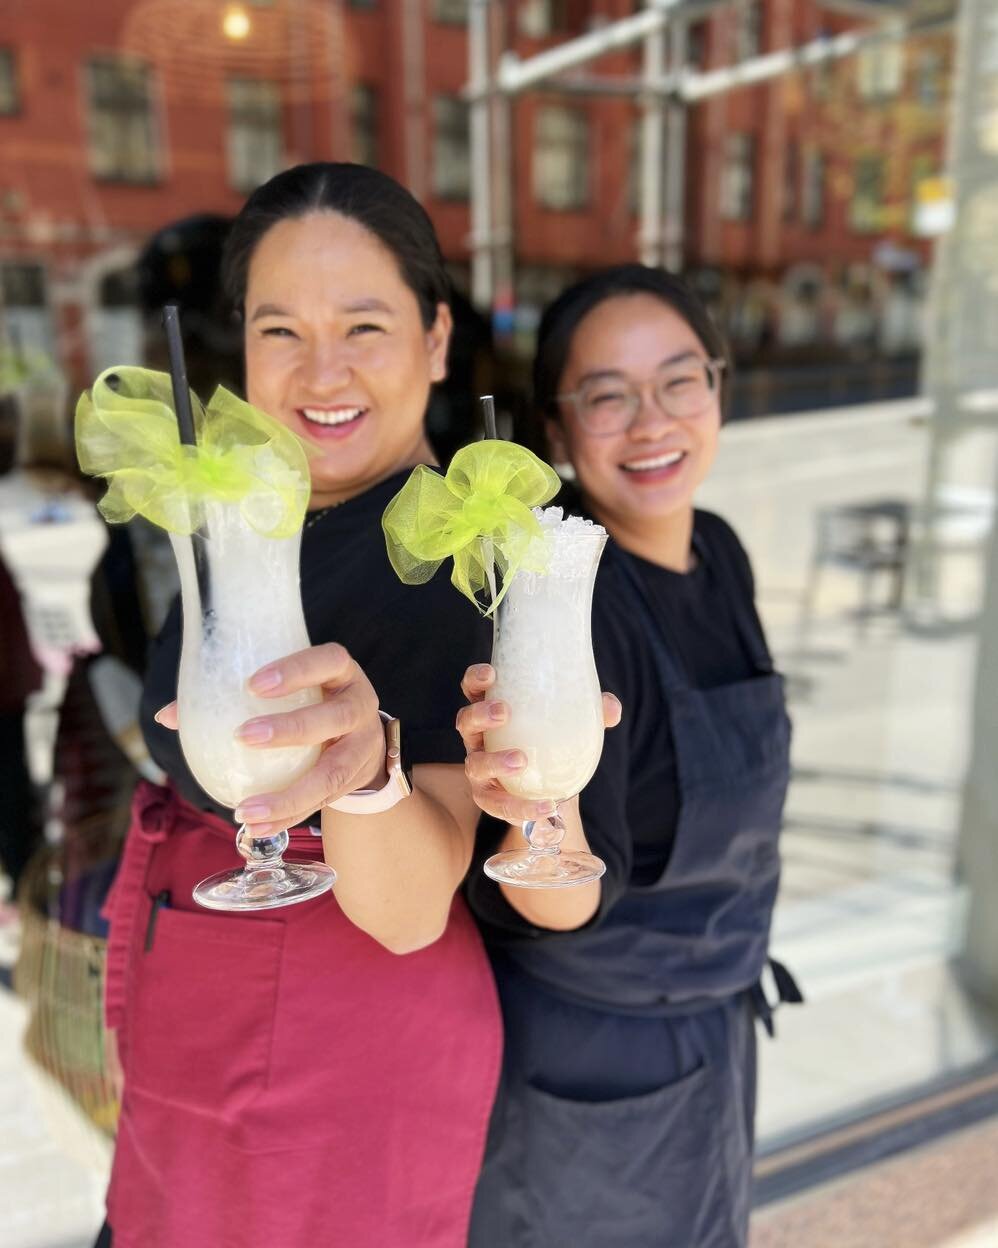 The SameSame people are cheering on Finland's victory in the Eurovision Song Contest today! Our Banana Colada drink was decorated in green today to show our support for our amazing finalist. 😍

You can find the Banana Colada 